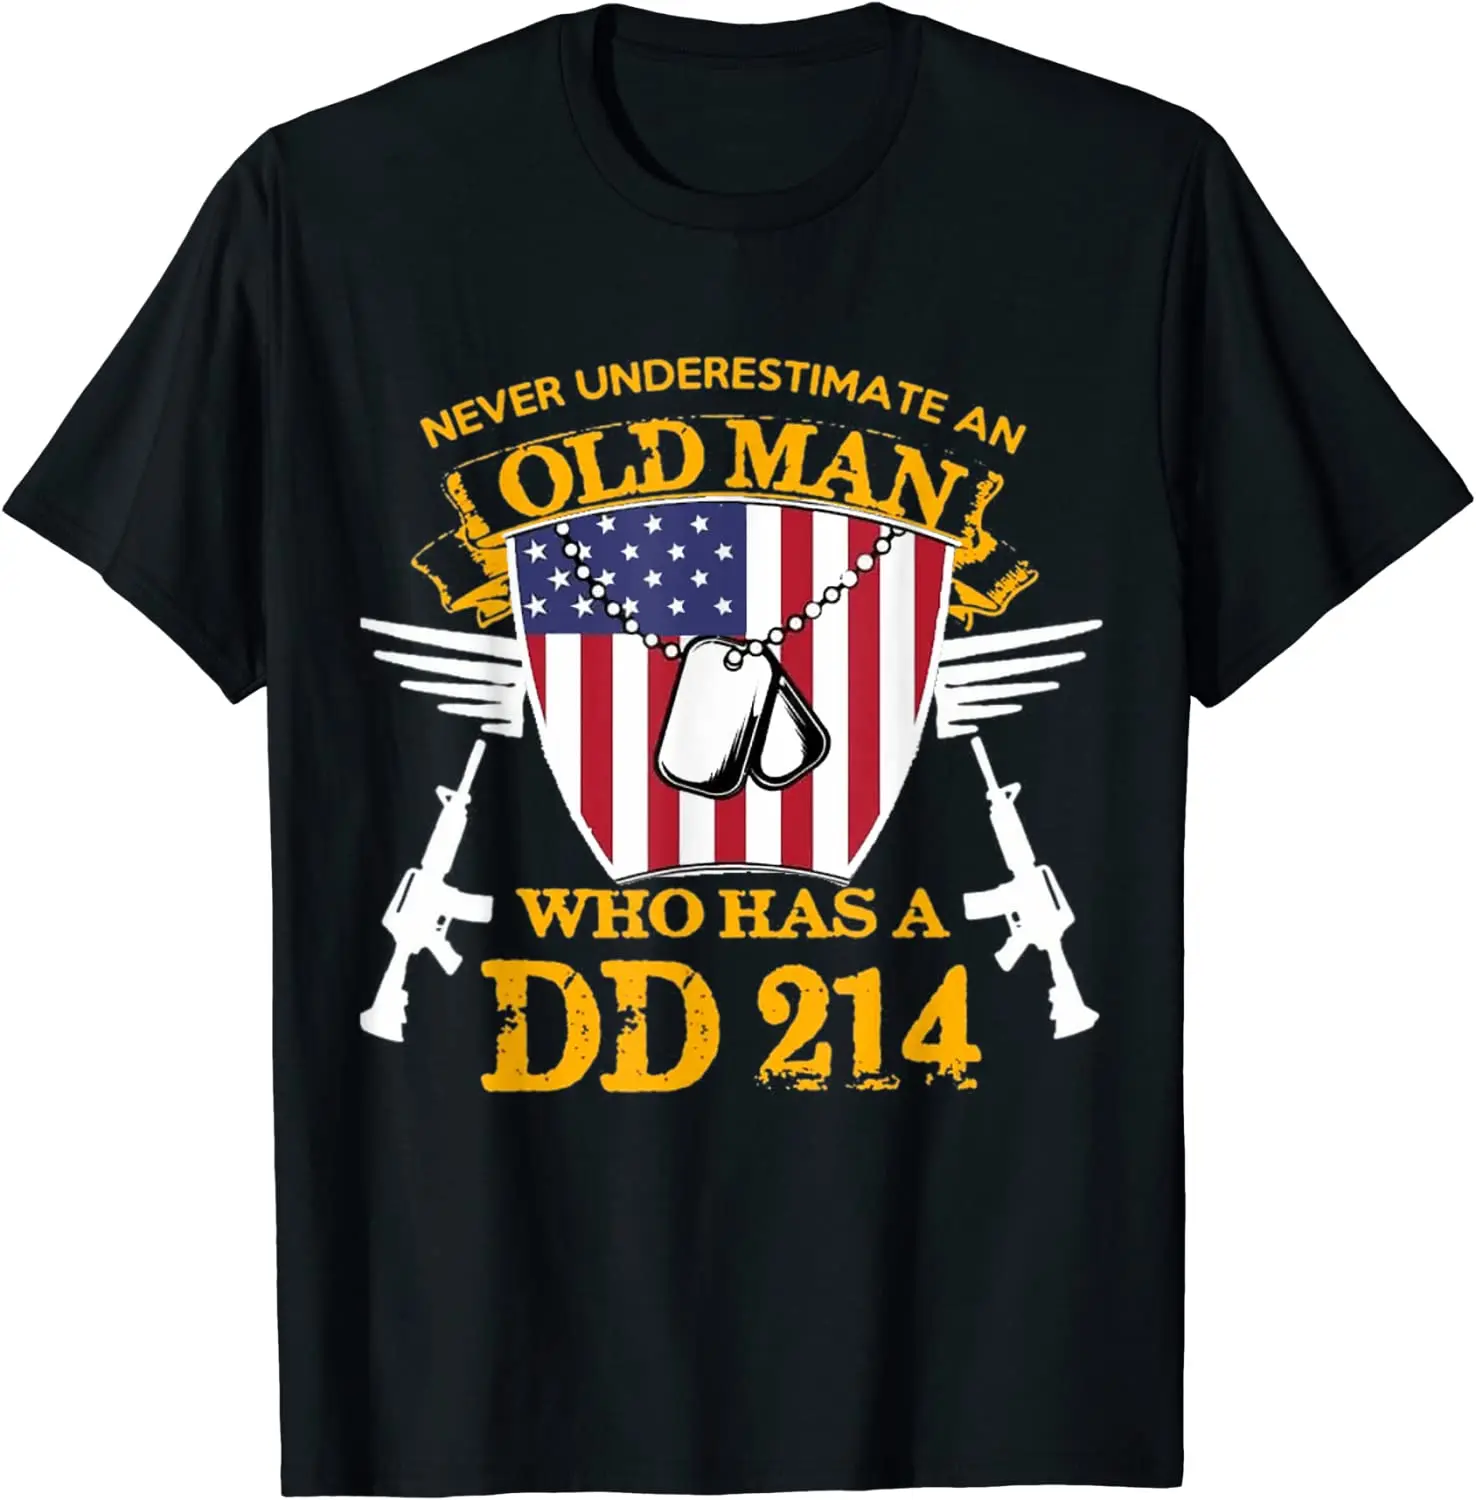 

Never Underestimate An Old Man Who Has A DD-214 Alumni Gift T-Shirt Men's 100% Cotton Casual T-shirts Loose Top Size S-3XL